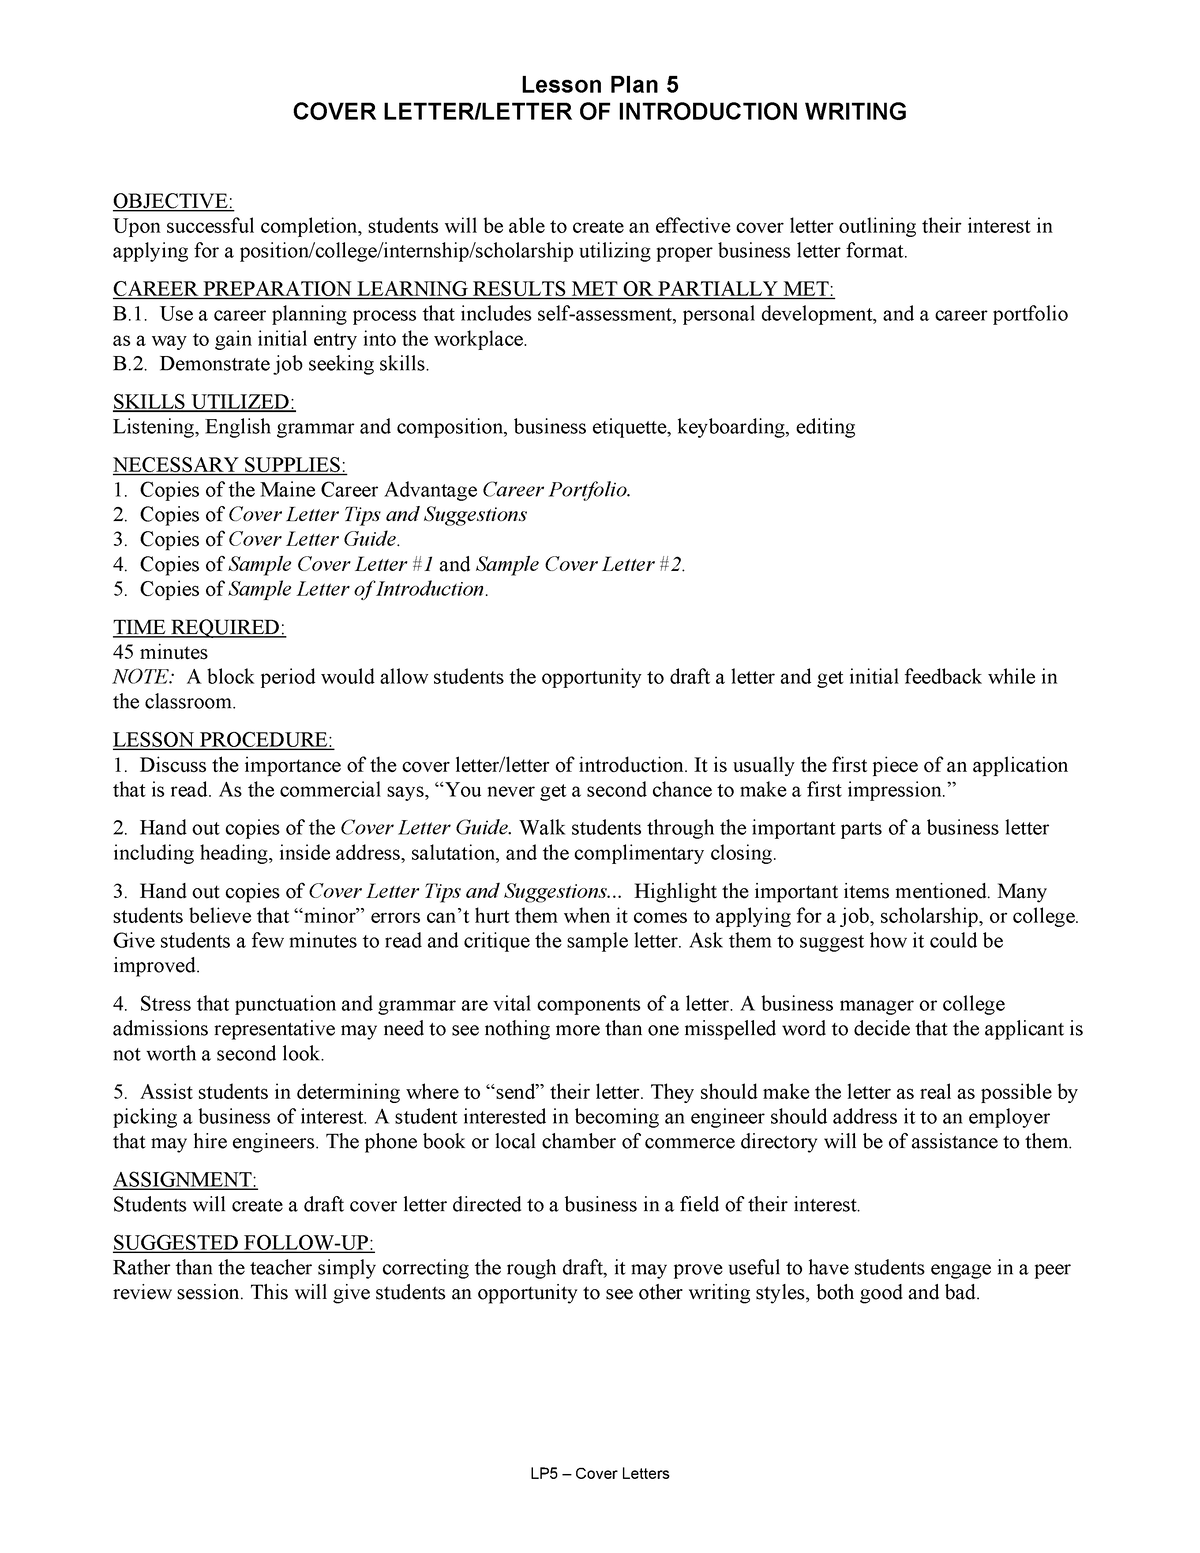 cover-letter-a-cover-letter-lesson-plan-5-cover-letter-letter-of